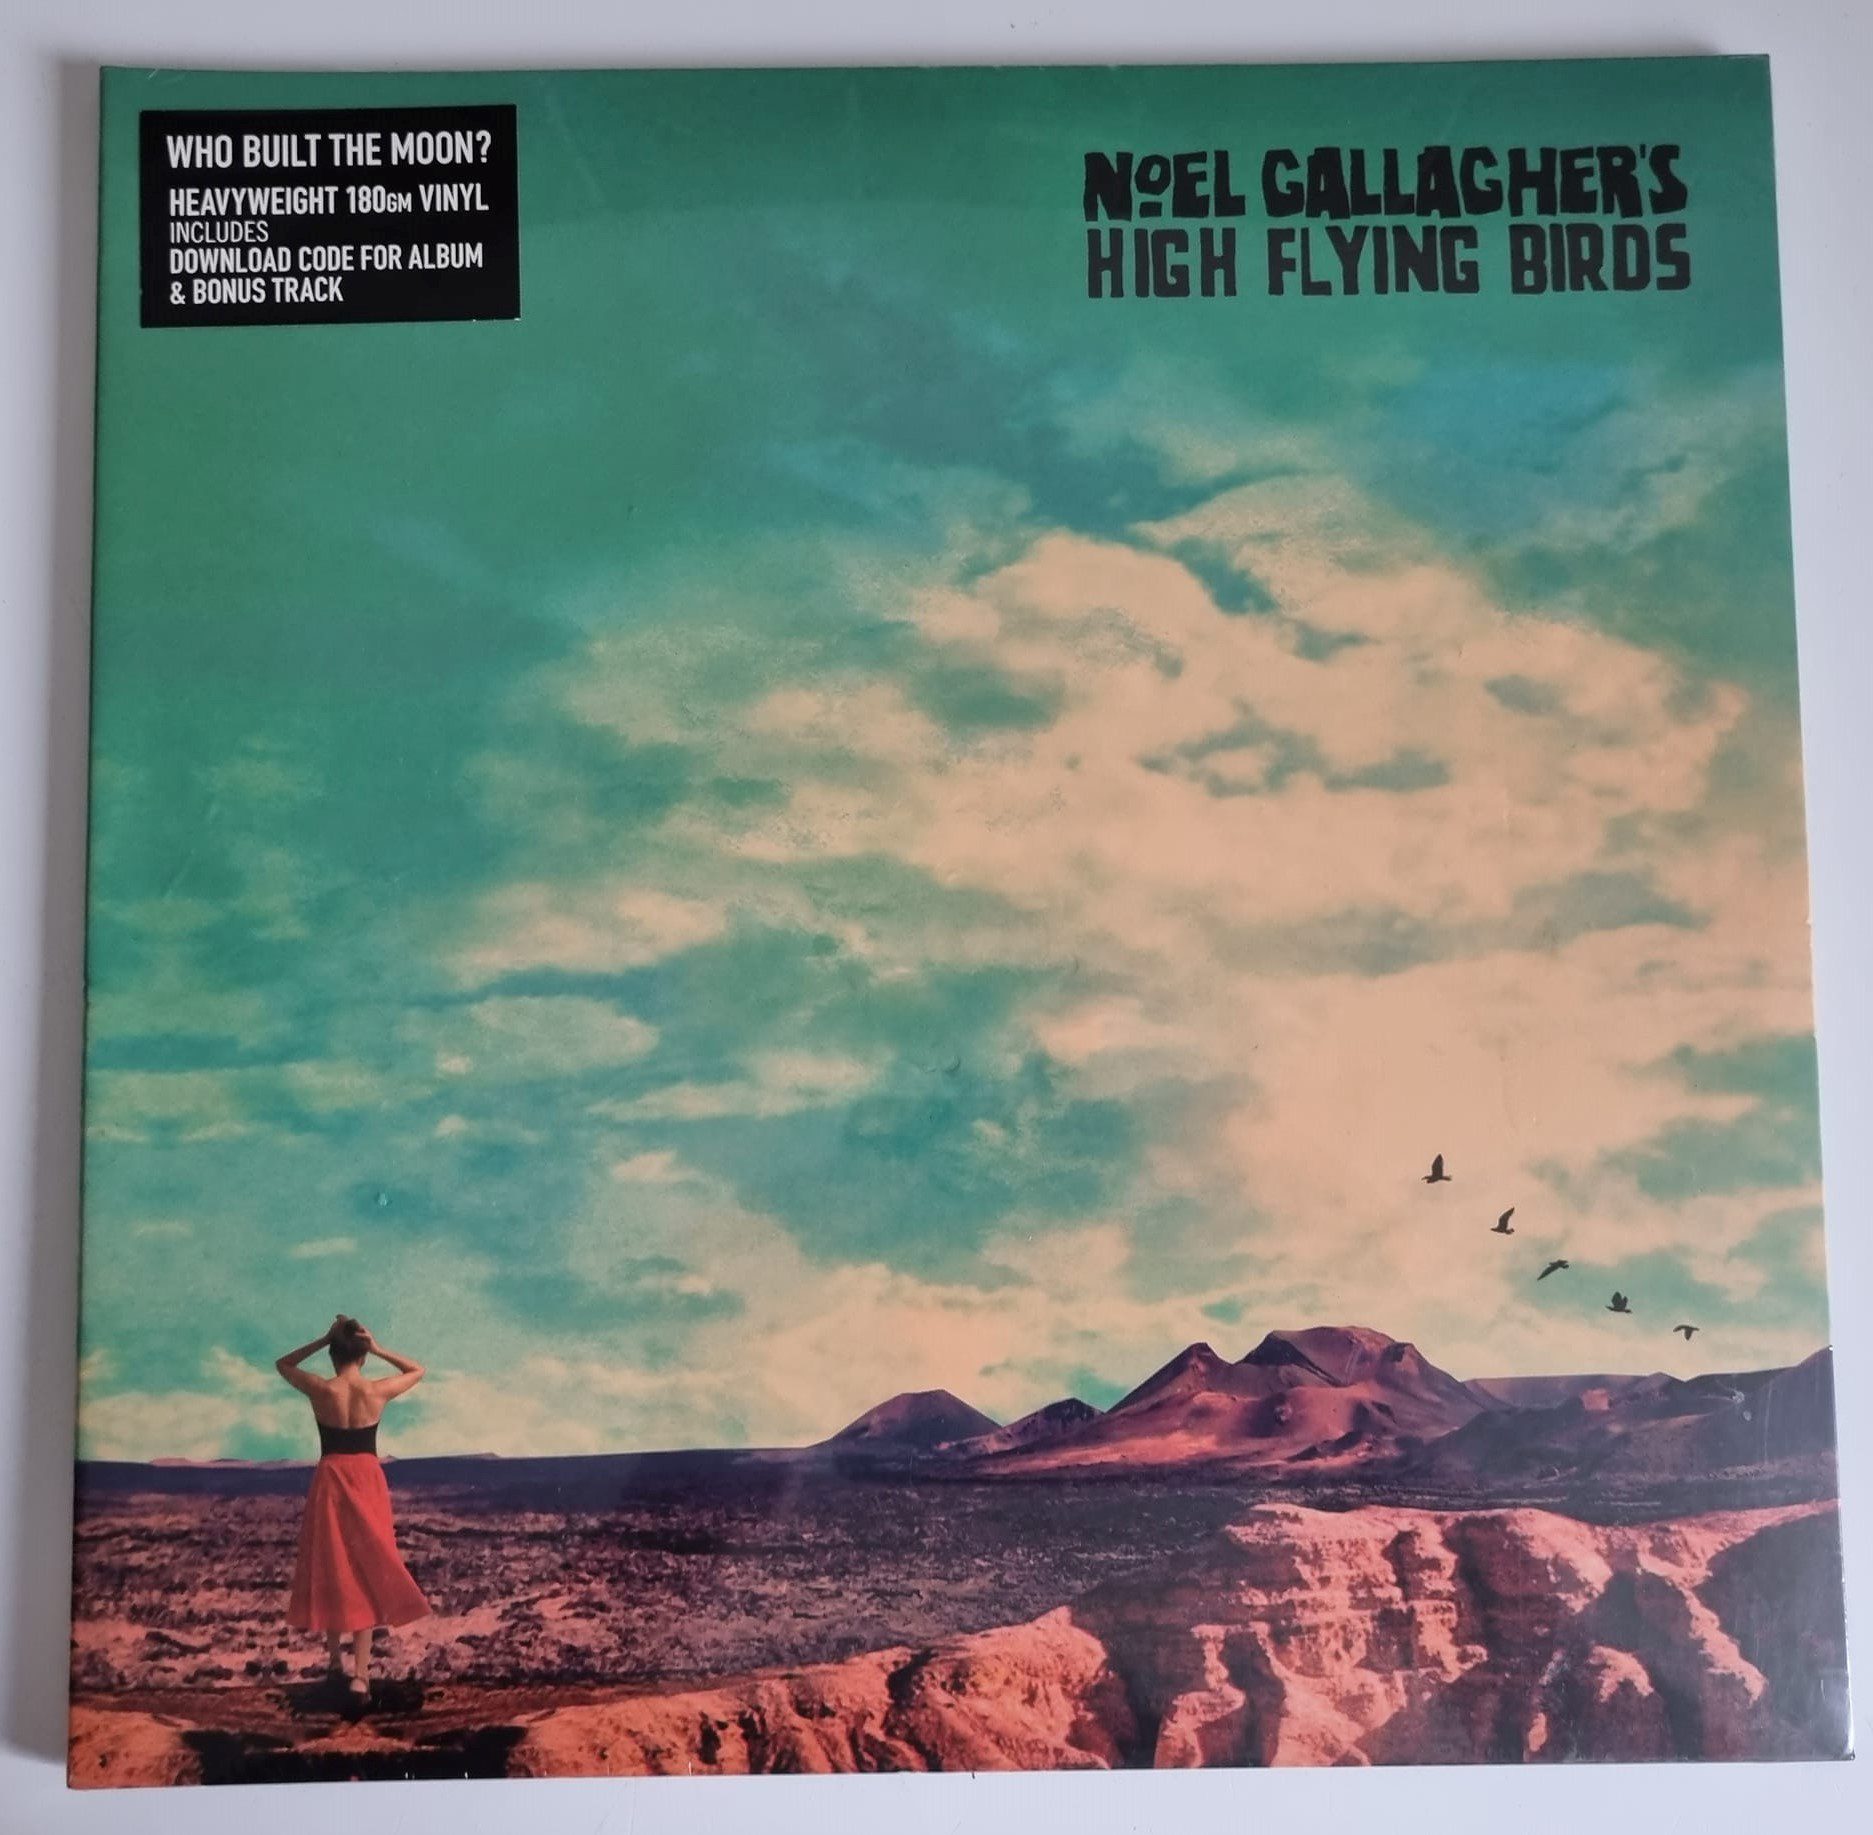 Buy this rare Noel Gallagher's High Flying Bird's record by clicking here